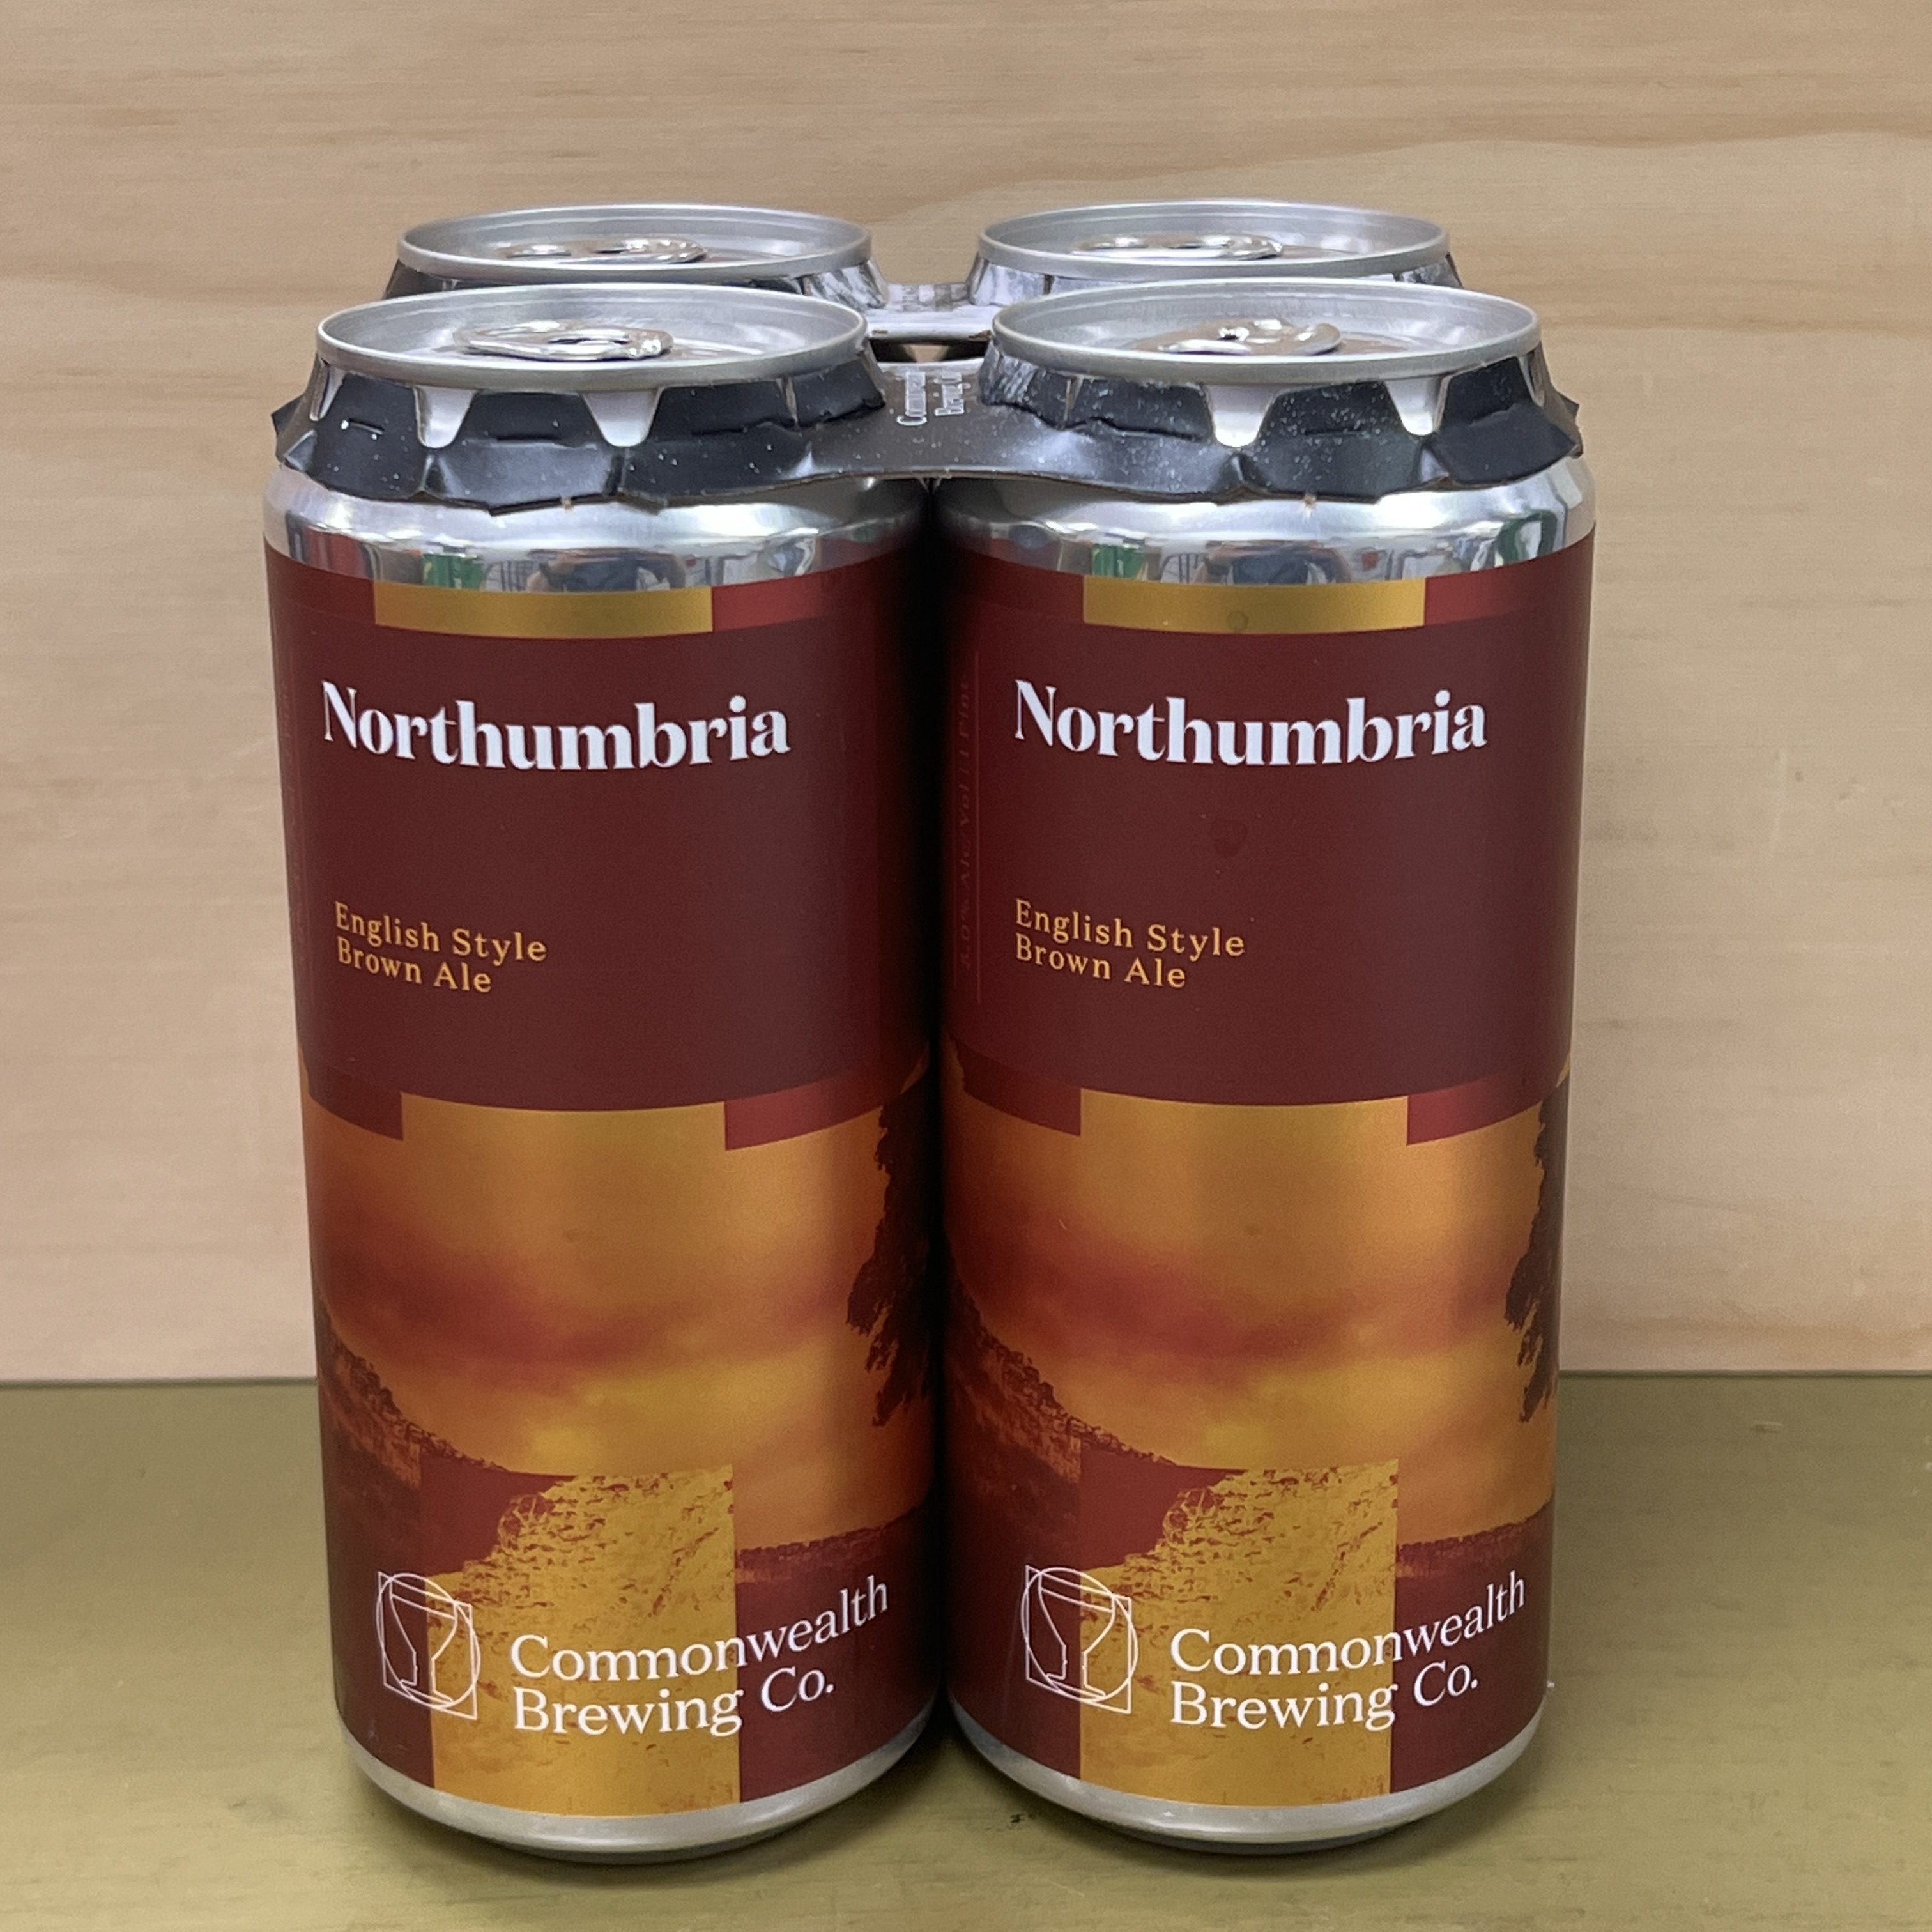 Commonwealth Brewing Northumbria English Style Brown Ale 4 x 16oz cans - Click Image to Close